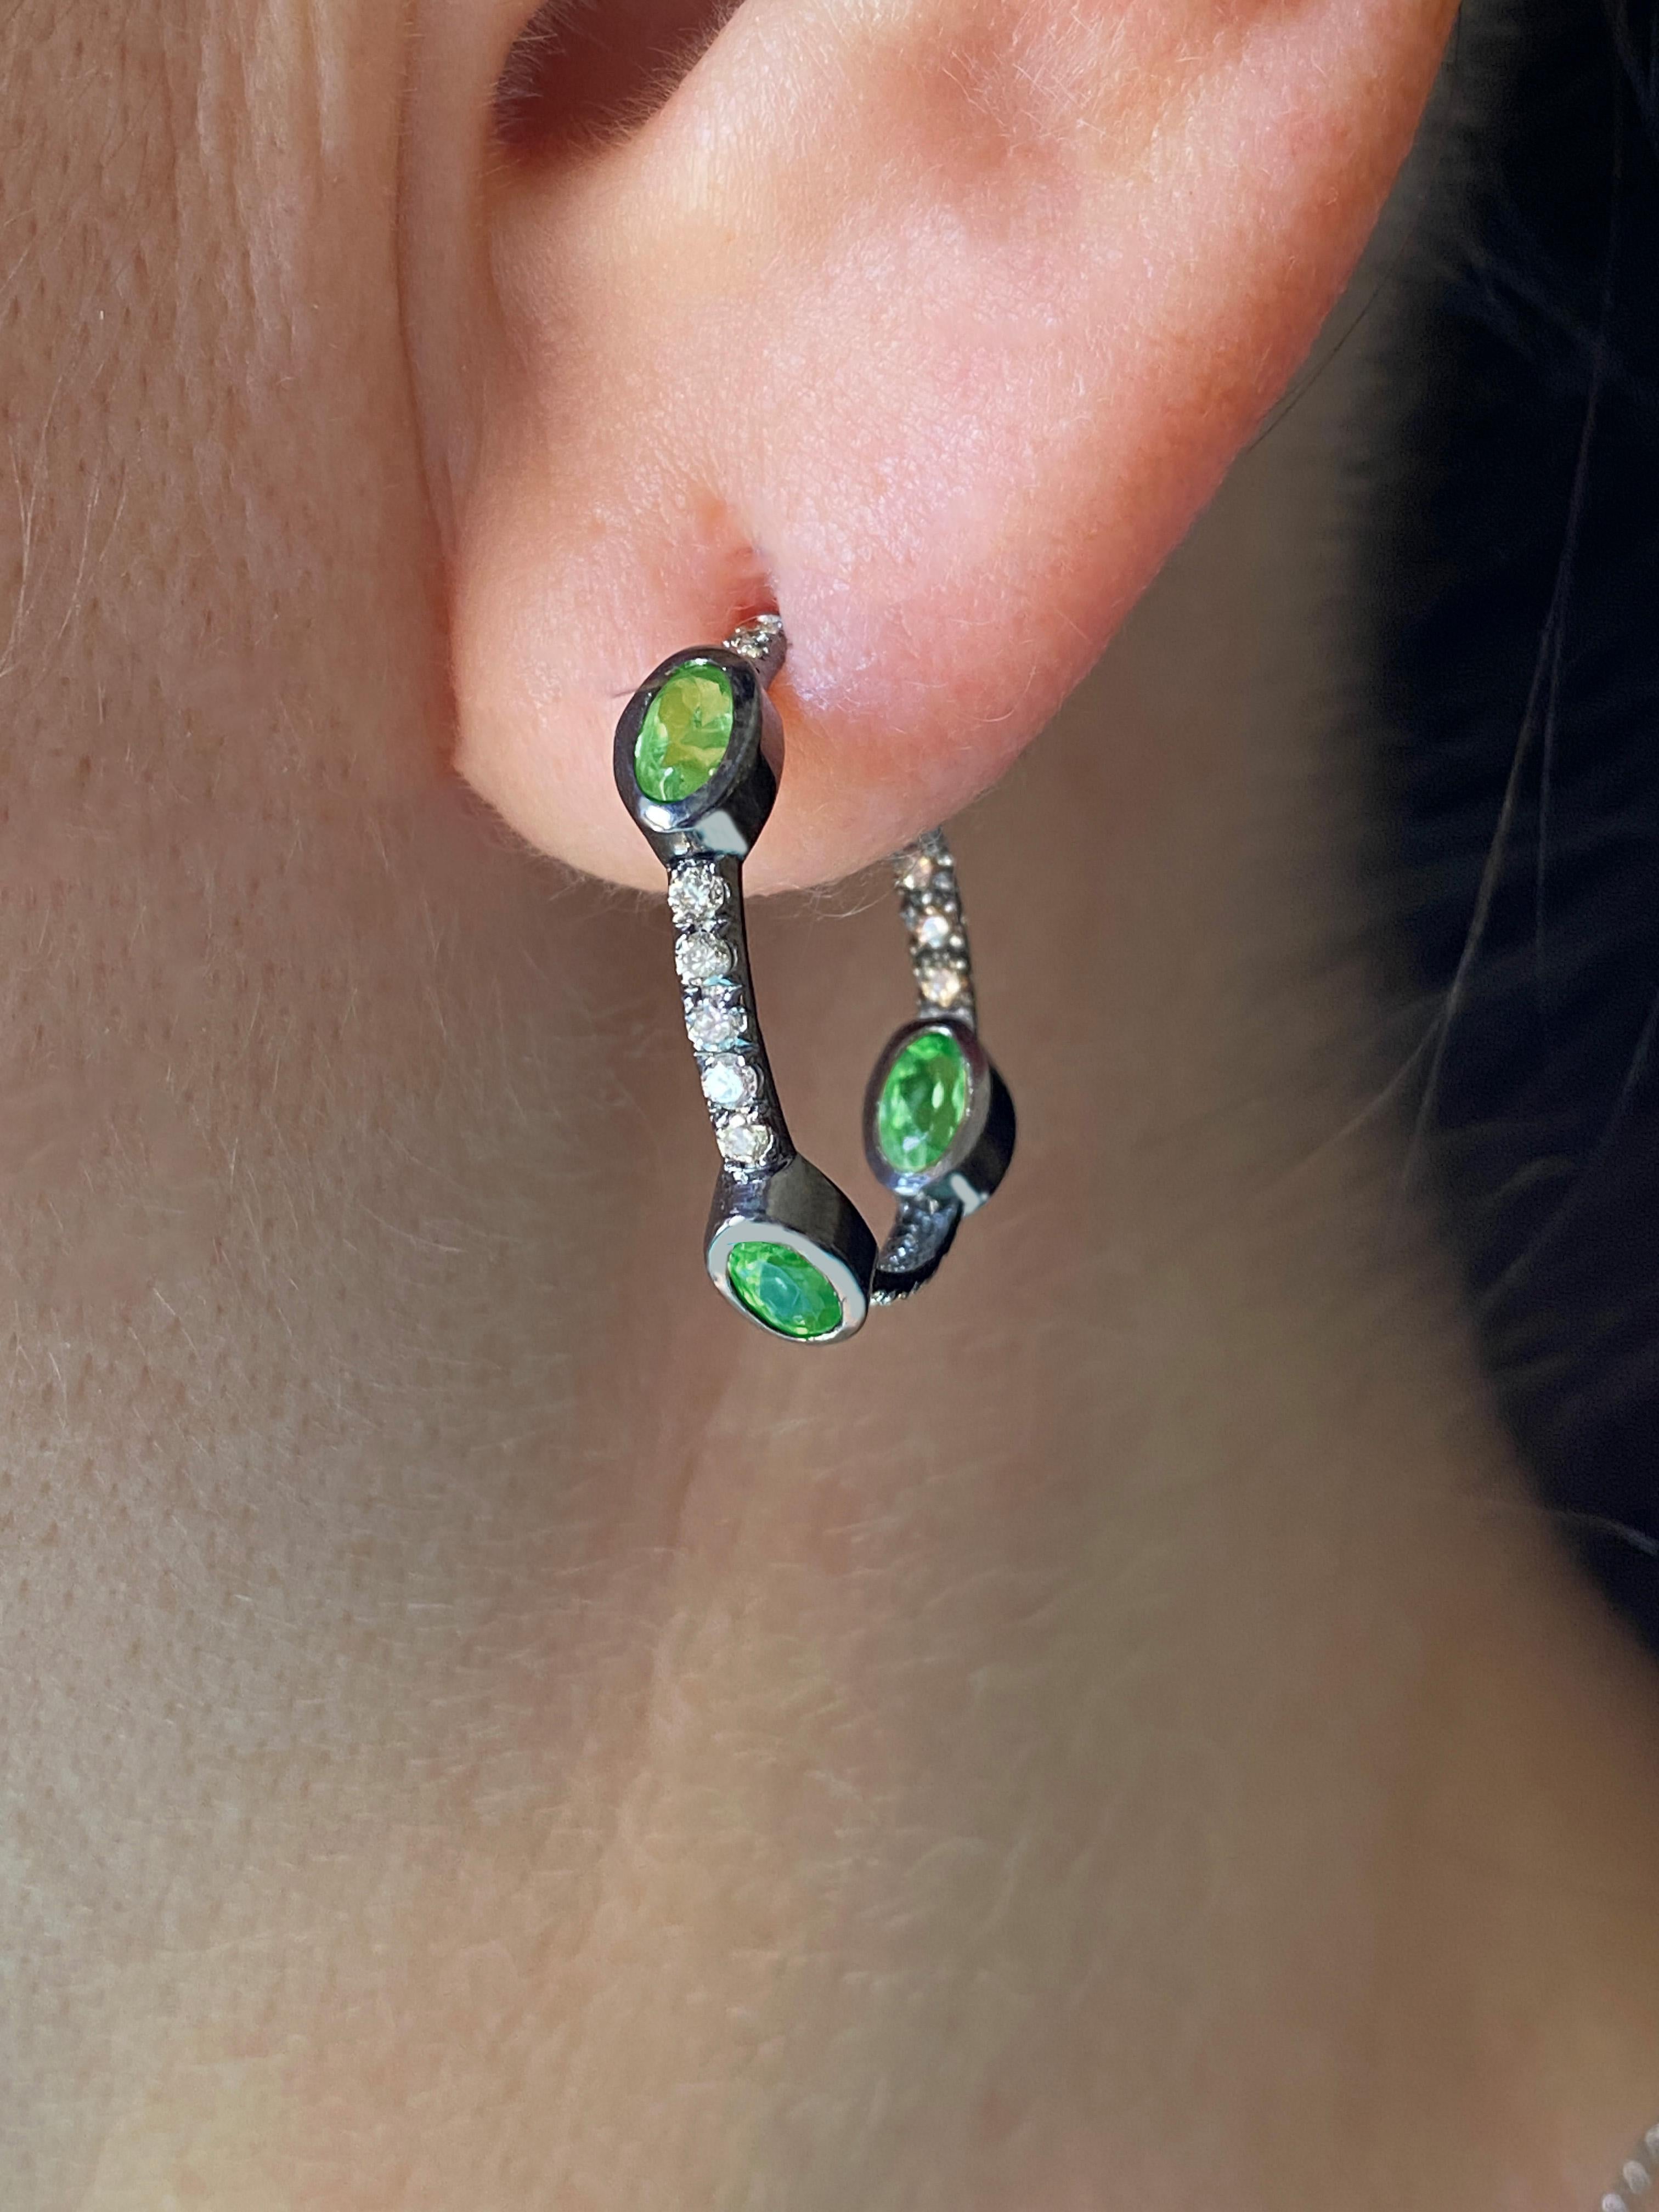 Elevate your style with the exquisite Rossella Ugolini Peridot and Diamond Hoop Earrings, a harmonious blend of elegance and modernity, meticulously handcrafted in Italy.

These unisex hoop earrings, with a 2 cm diameter, are a symphony of Peridot